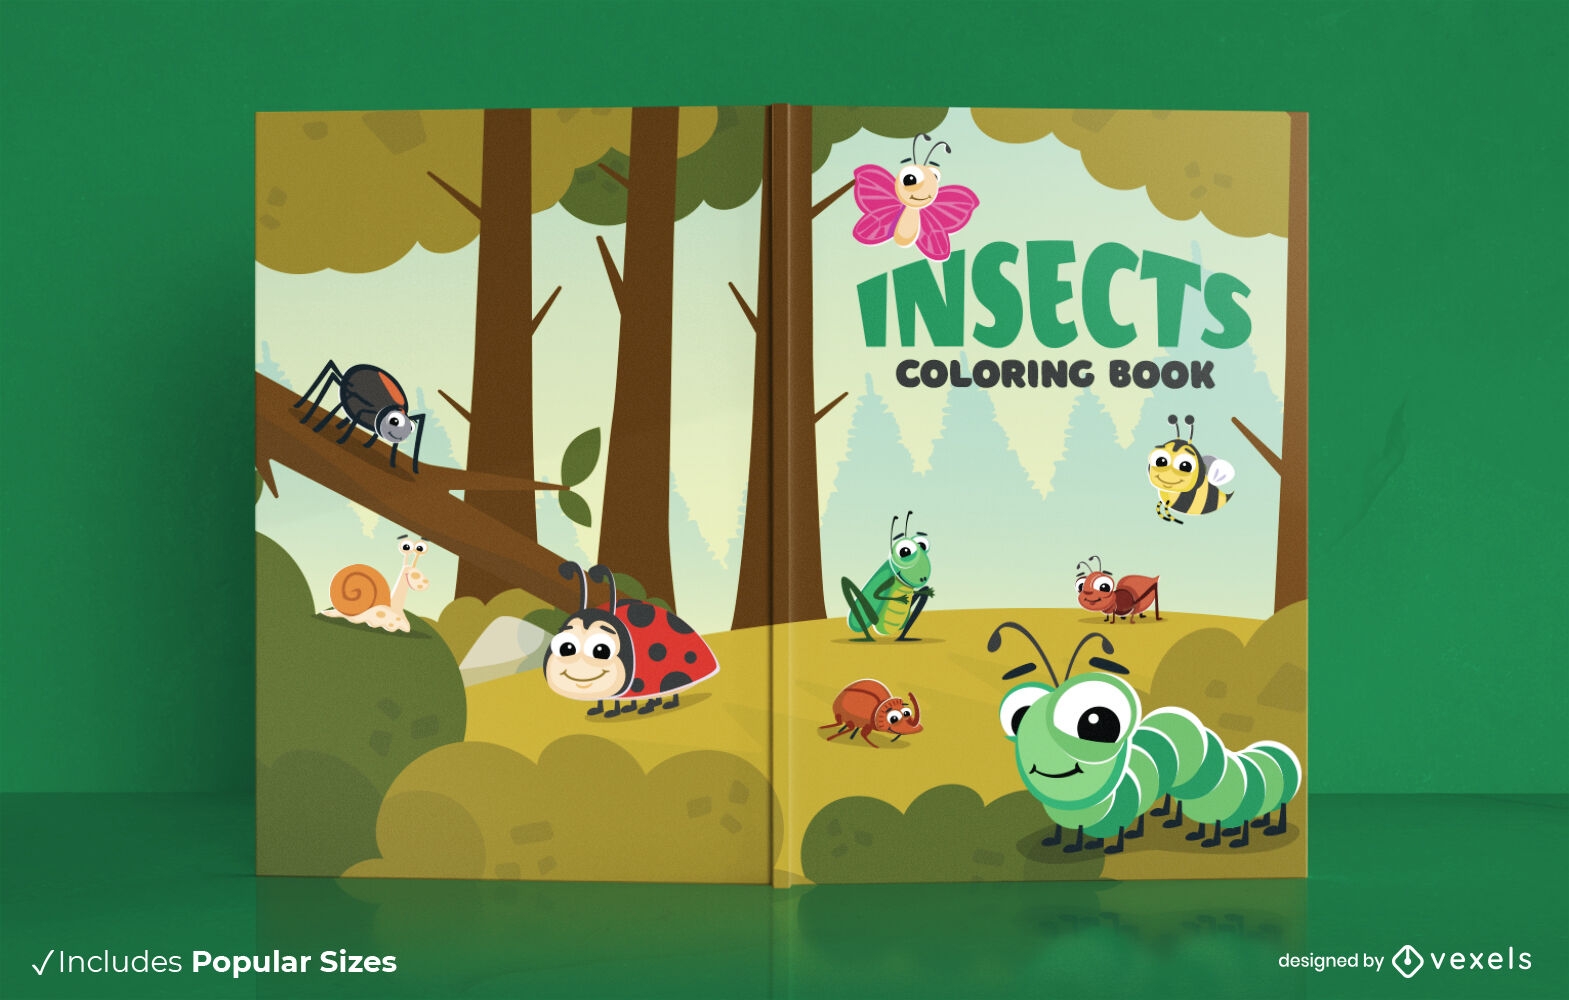 Insects coloring book cover design